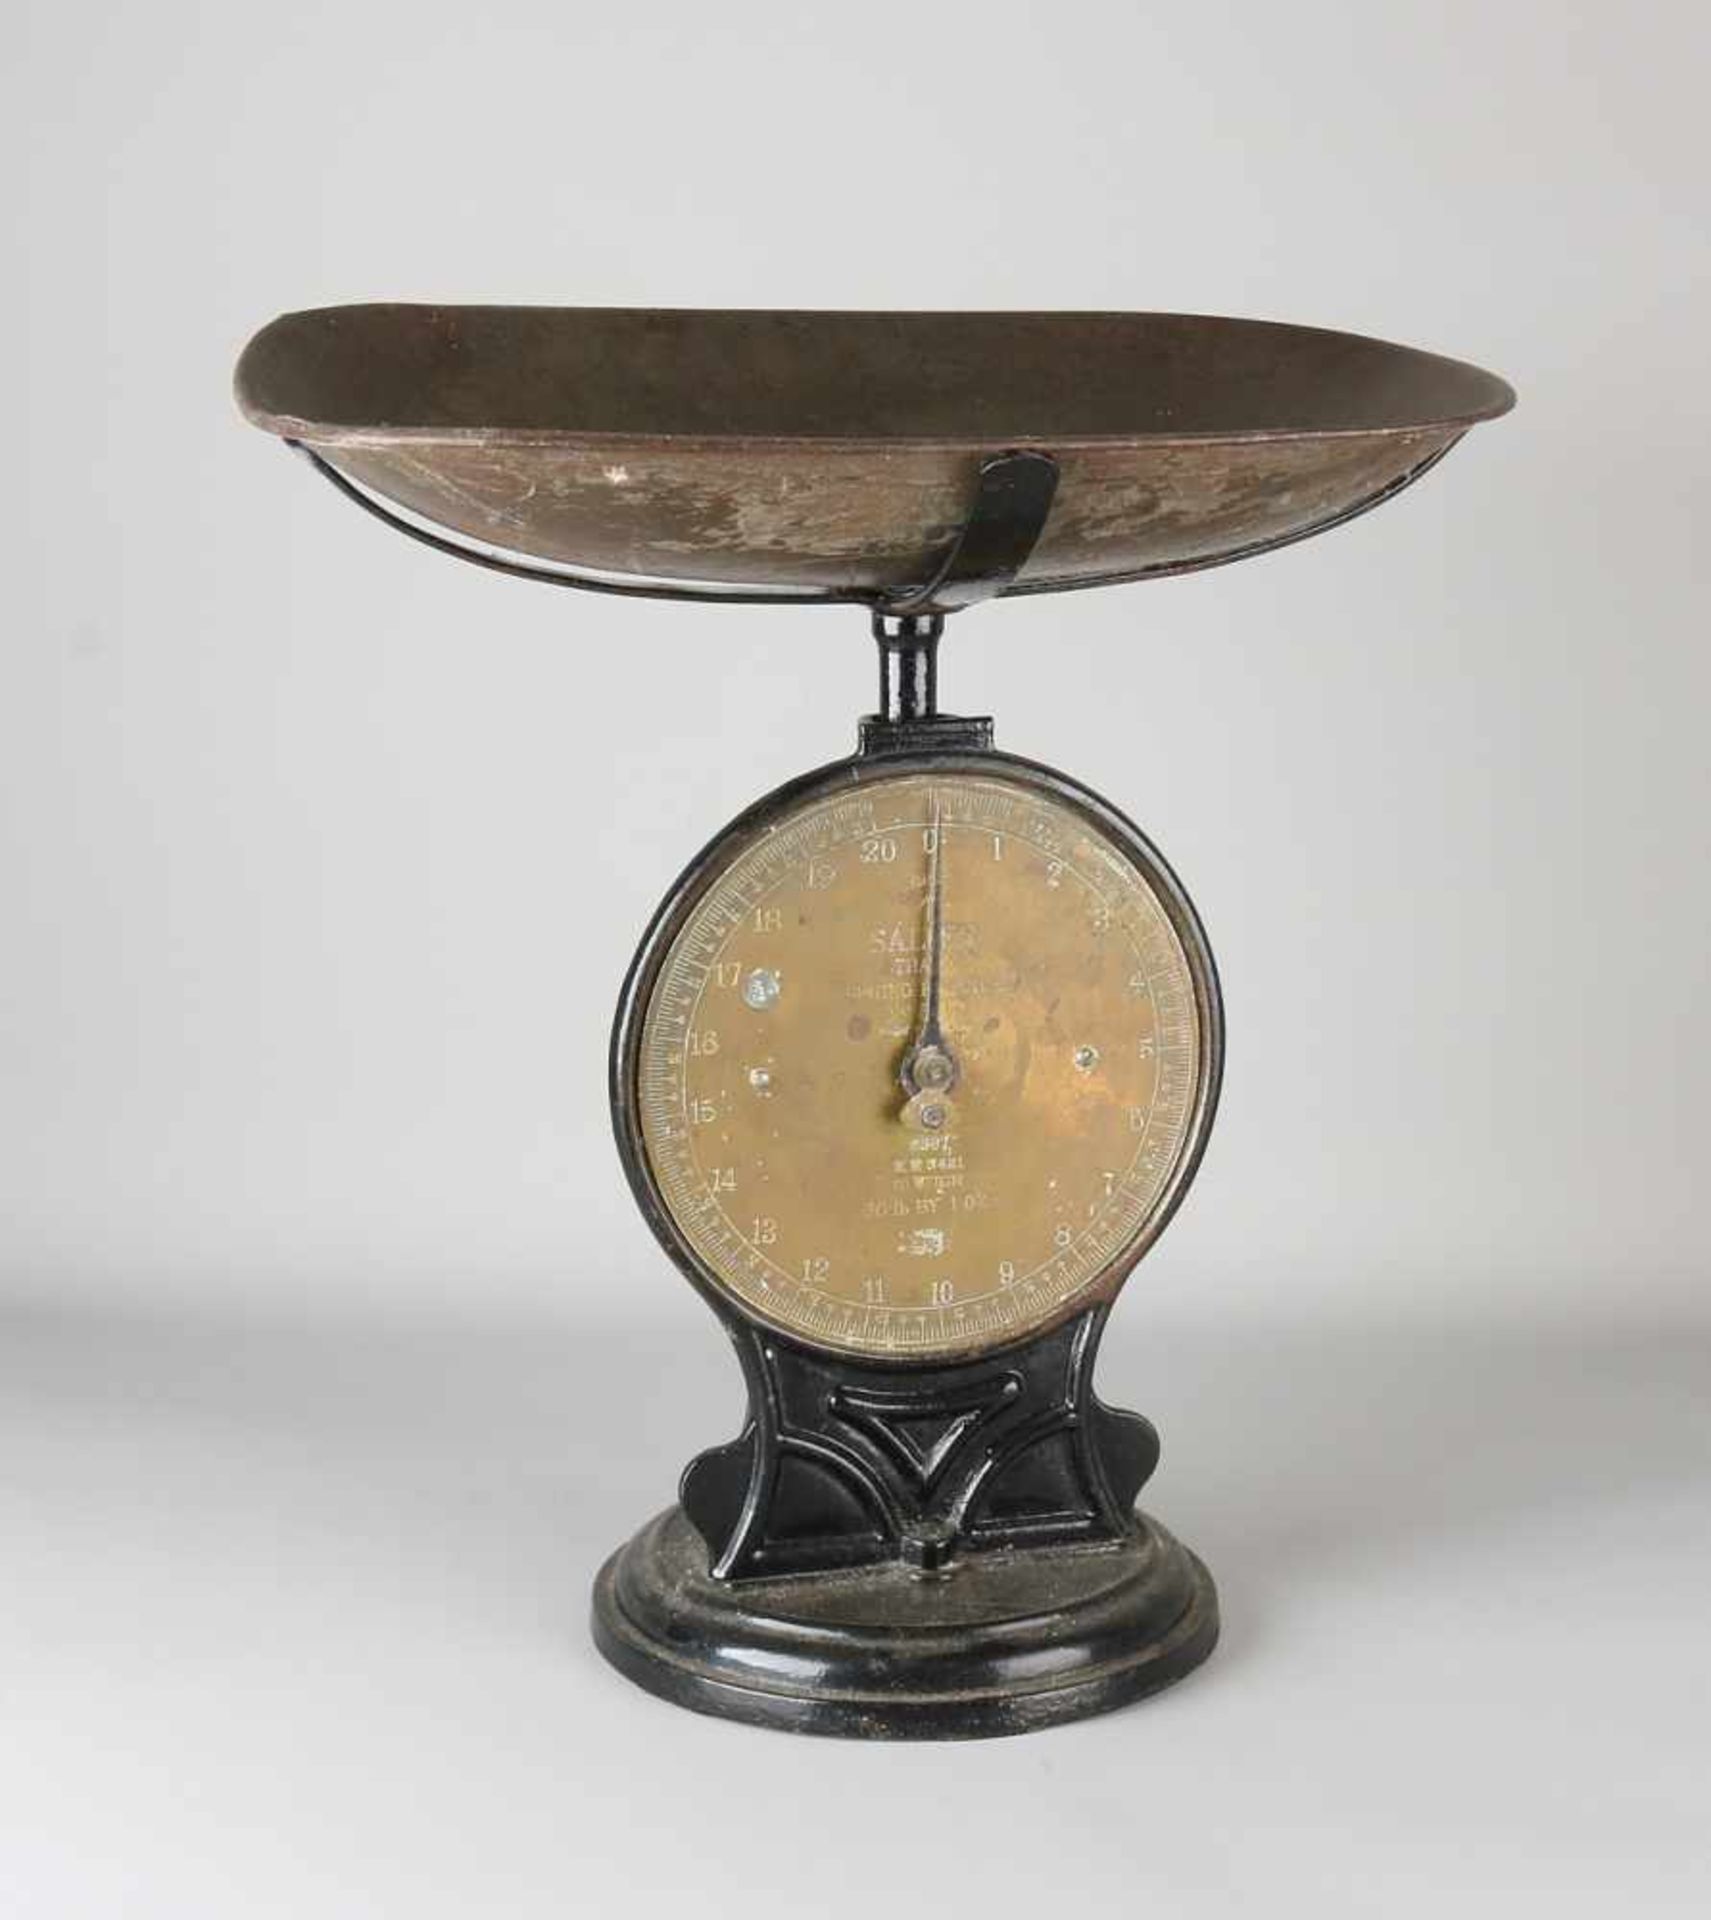 Large antique English cast grocery scale with brass dial. Salter Spring Trade Balance. Size: 42 x 41